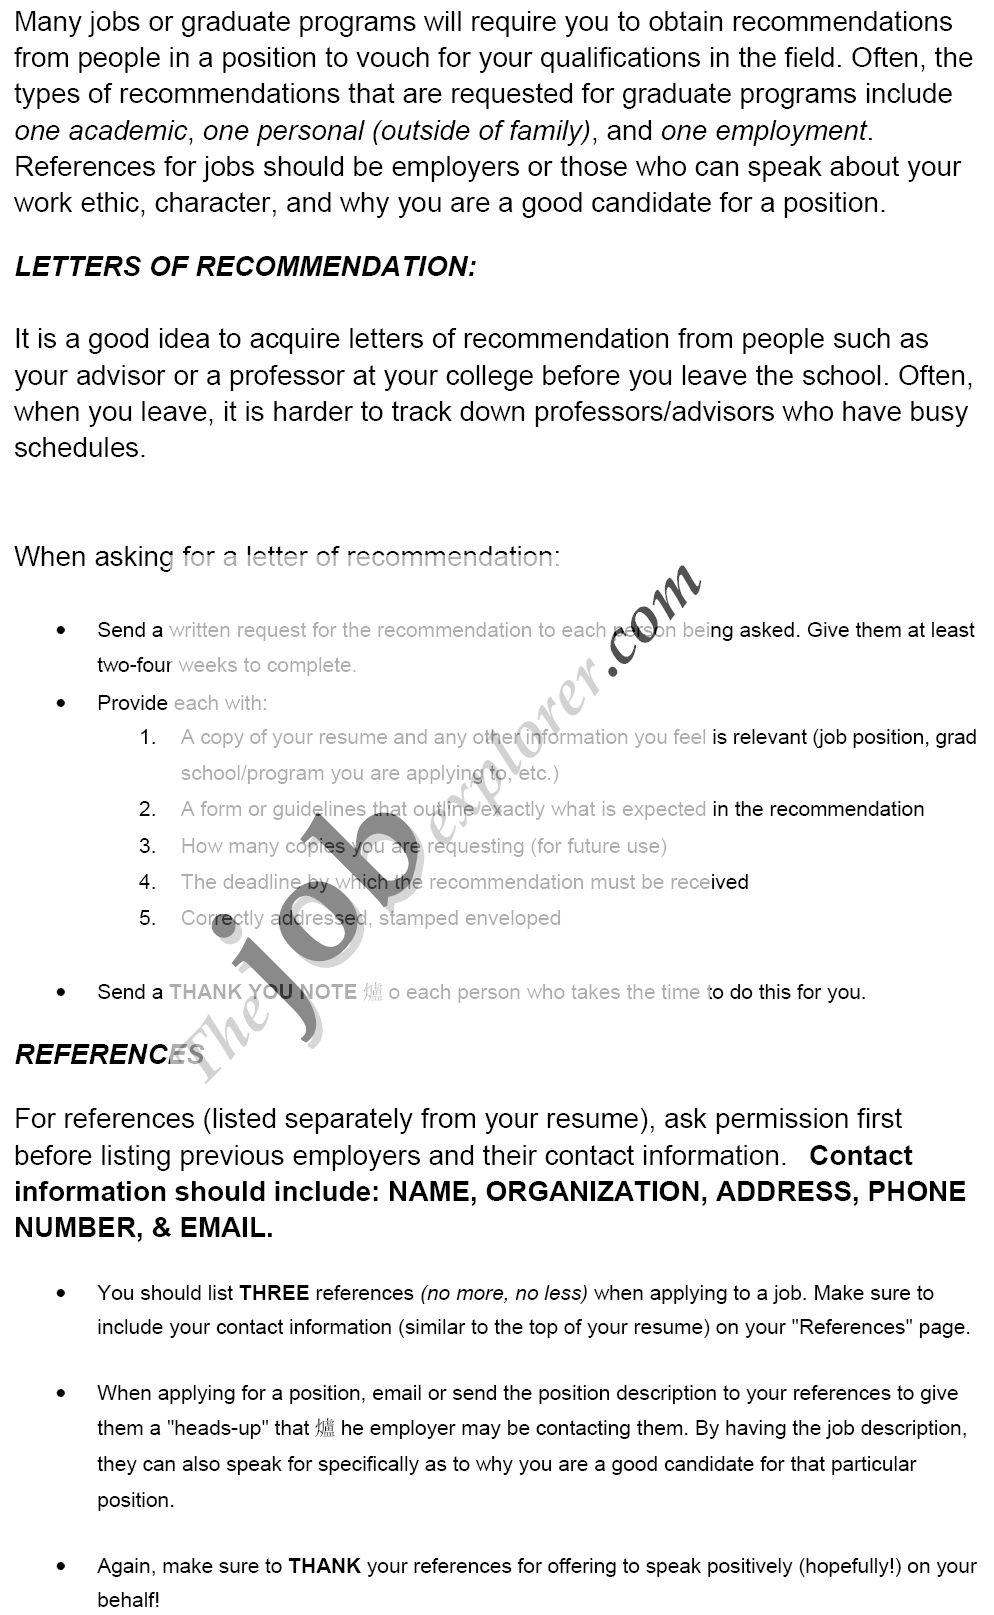 Employer Letter Of Recommendation Template from www.thejobexplorer.com